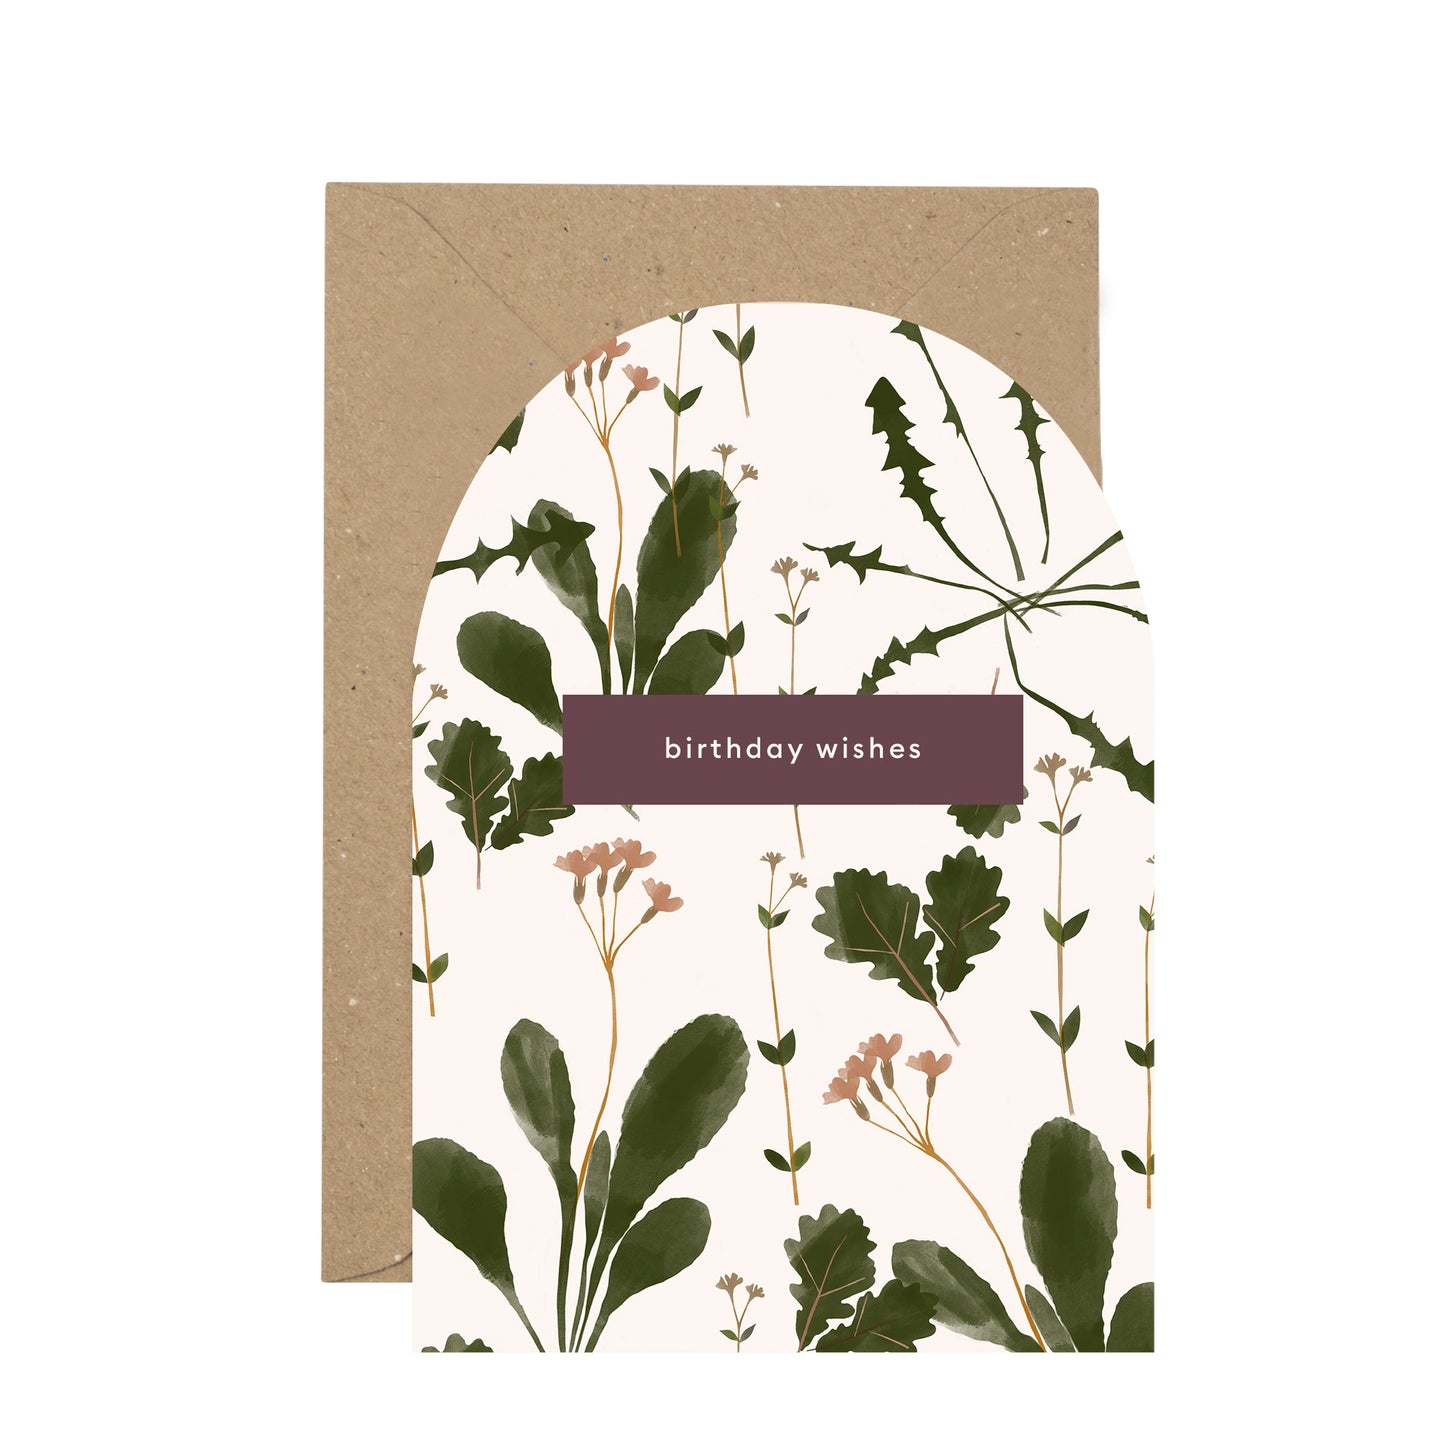 Arch shaped greetings card with weedy plant illustrations. A purple rectangle at the middle has the text, birthday wishes.